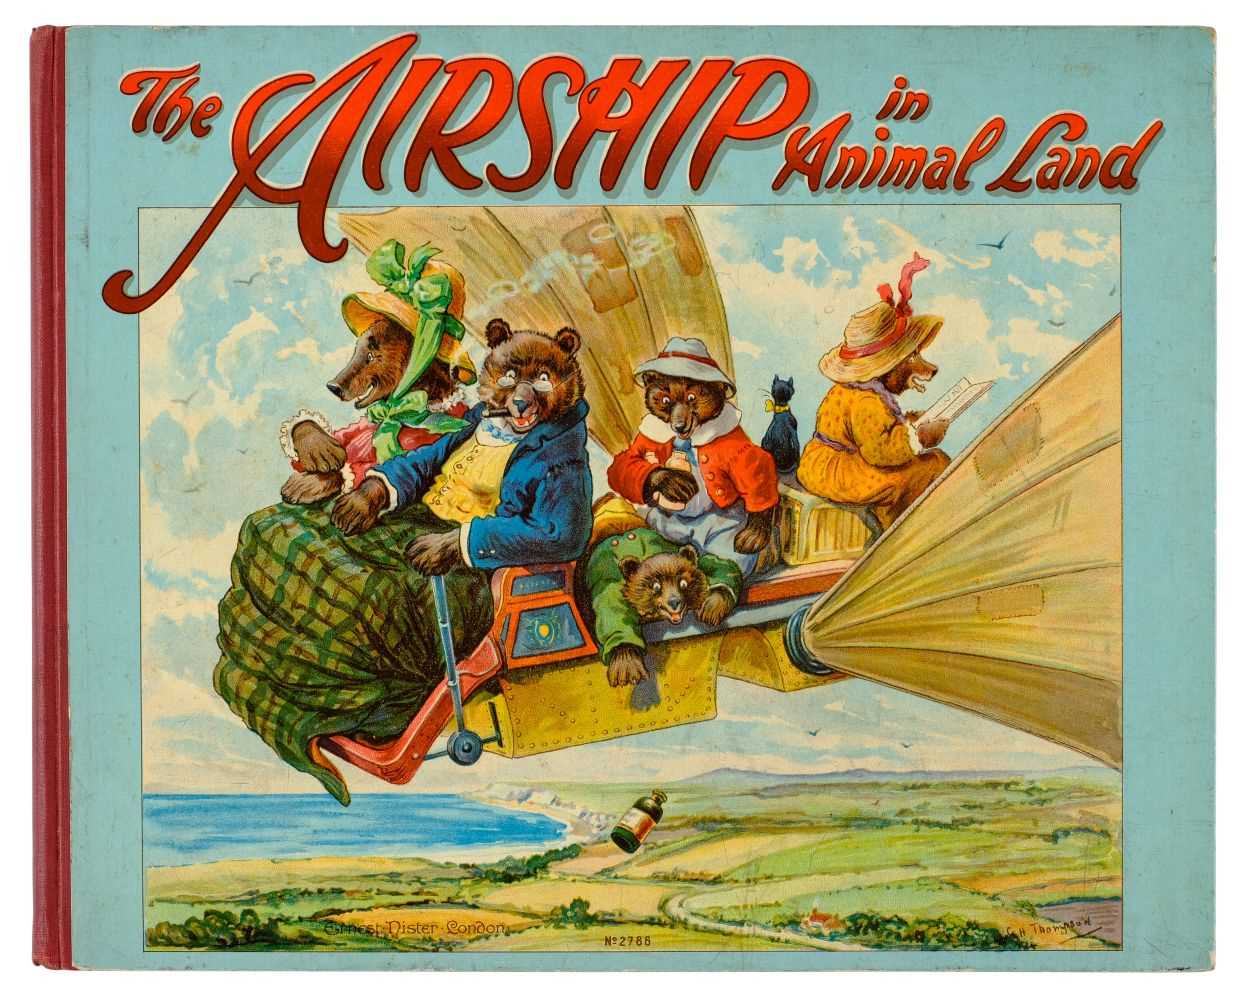 Lot 530 - Bingham (Clifton). The Airship in Animal Land, Pictured by G. H. Thompson, [1910]